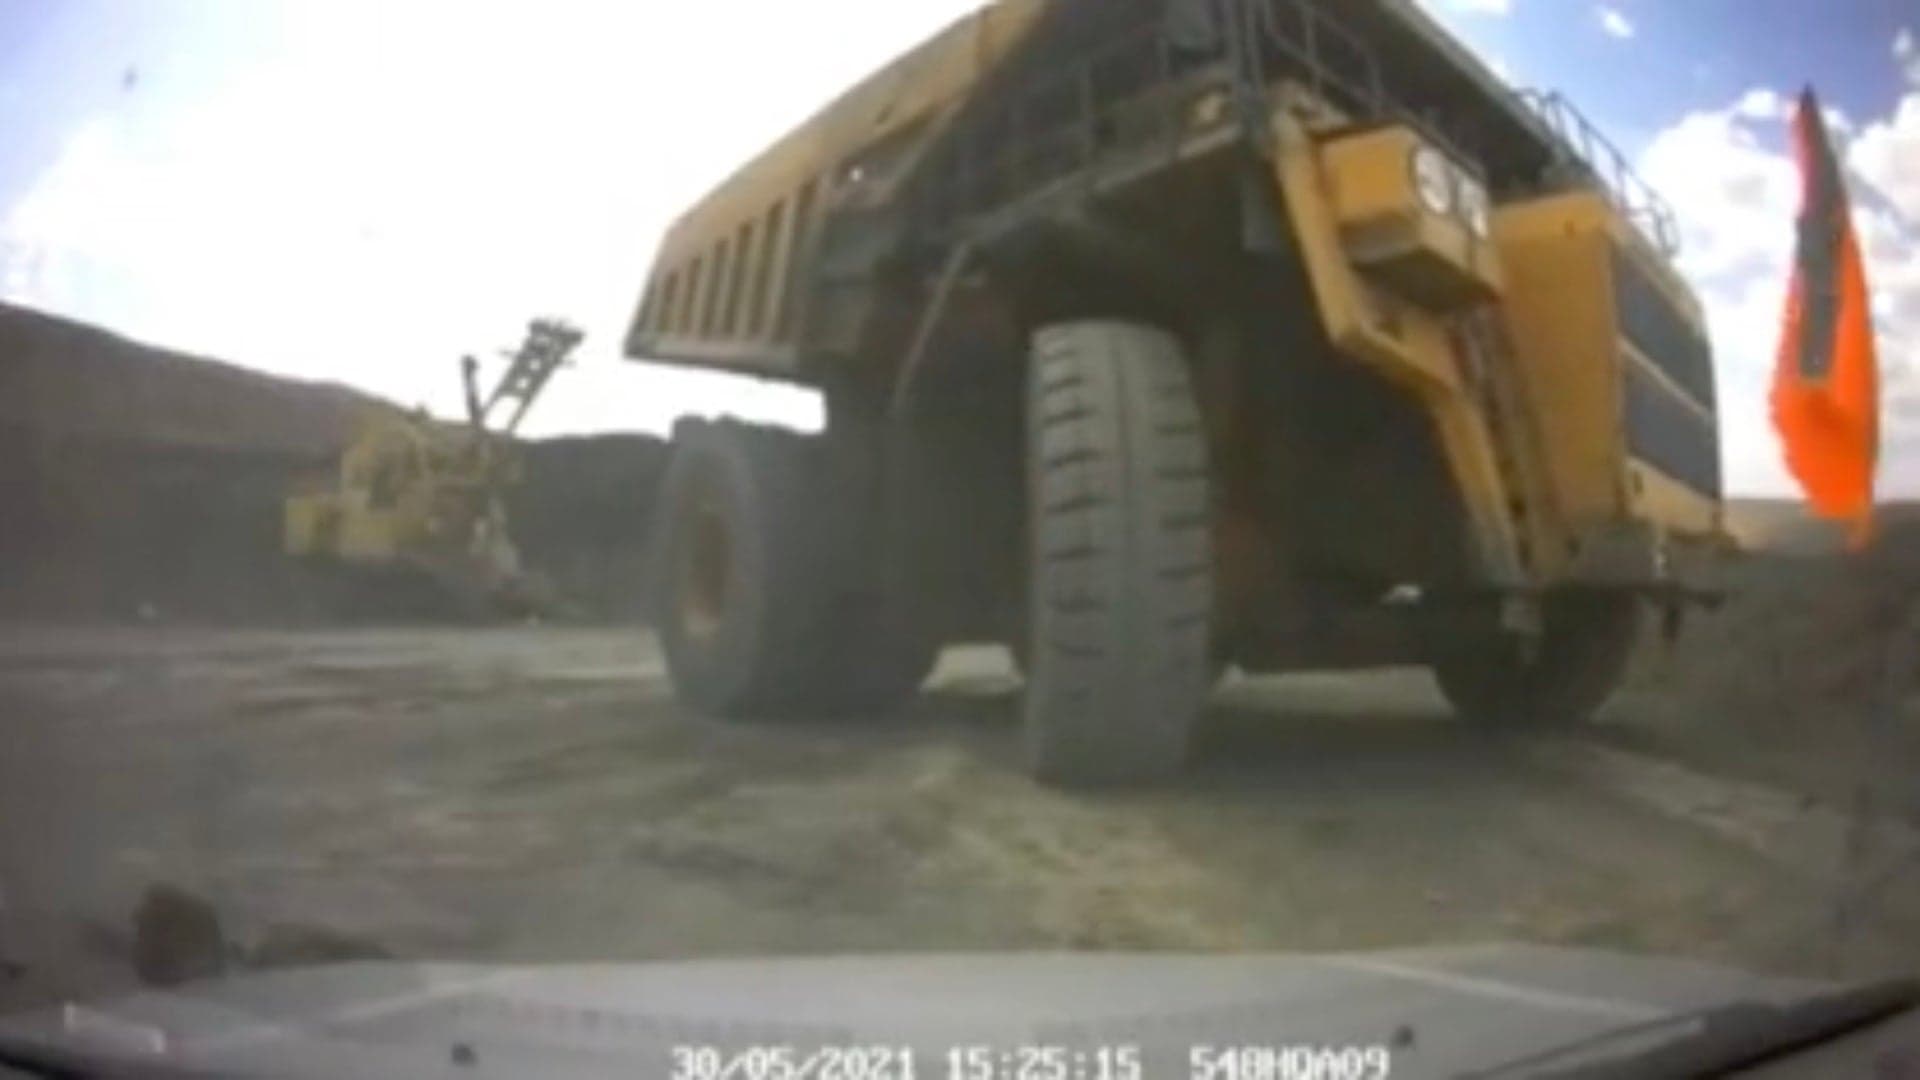 Dash Cam Captures Moment a Giant Mining Truck Crushes an Occupied SUV